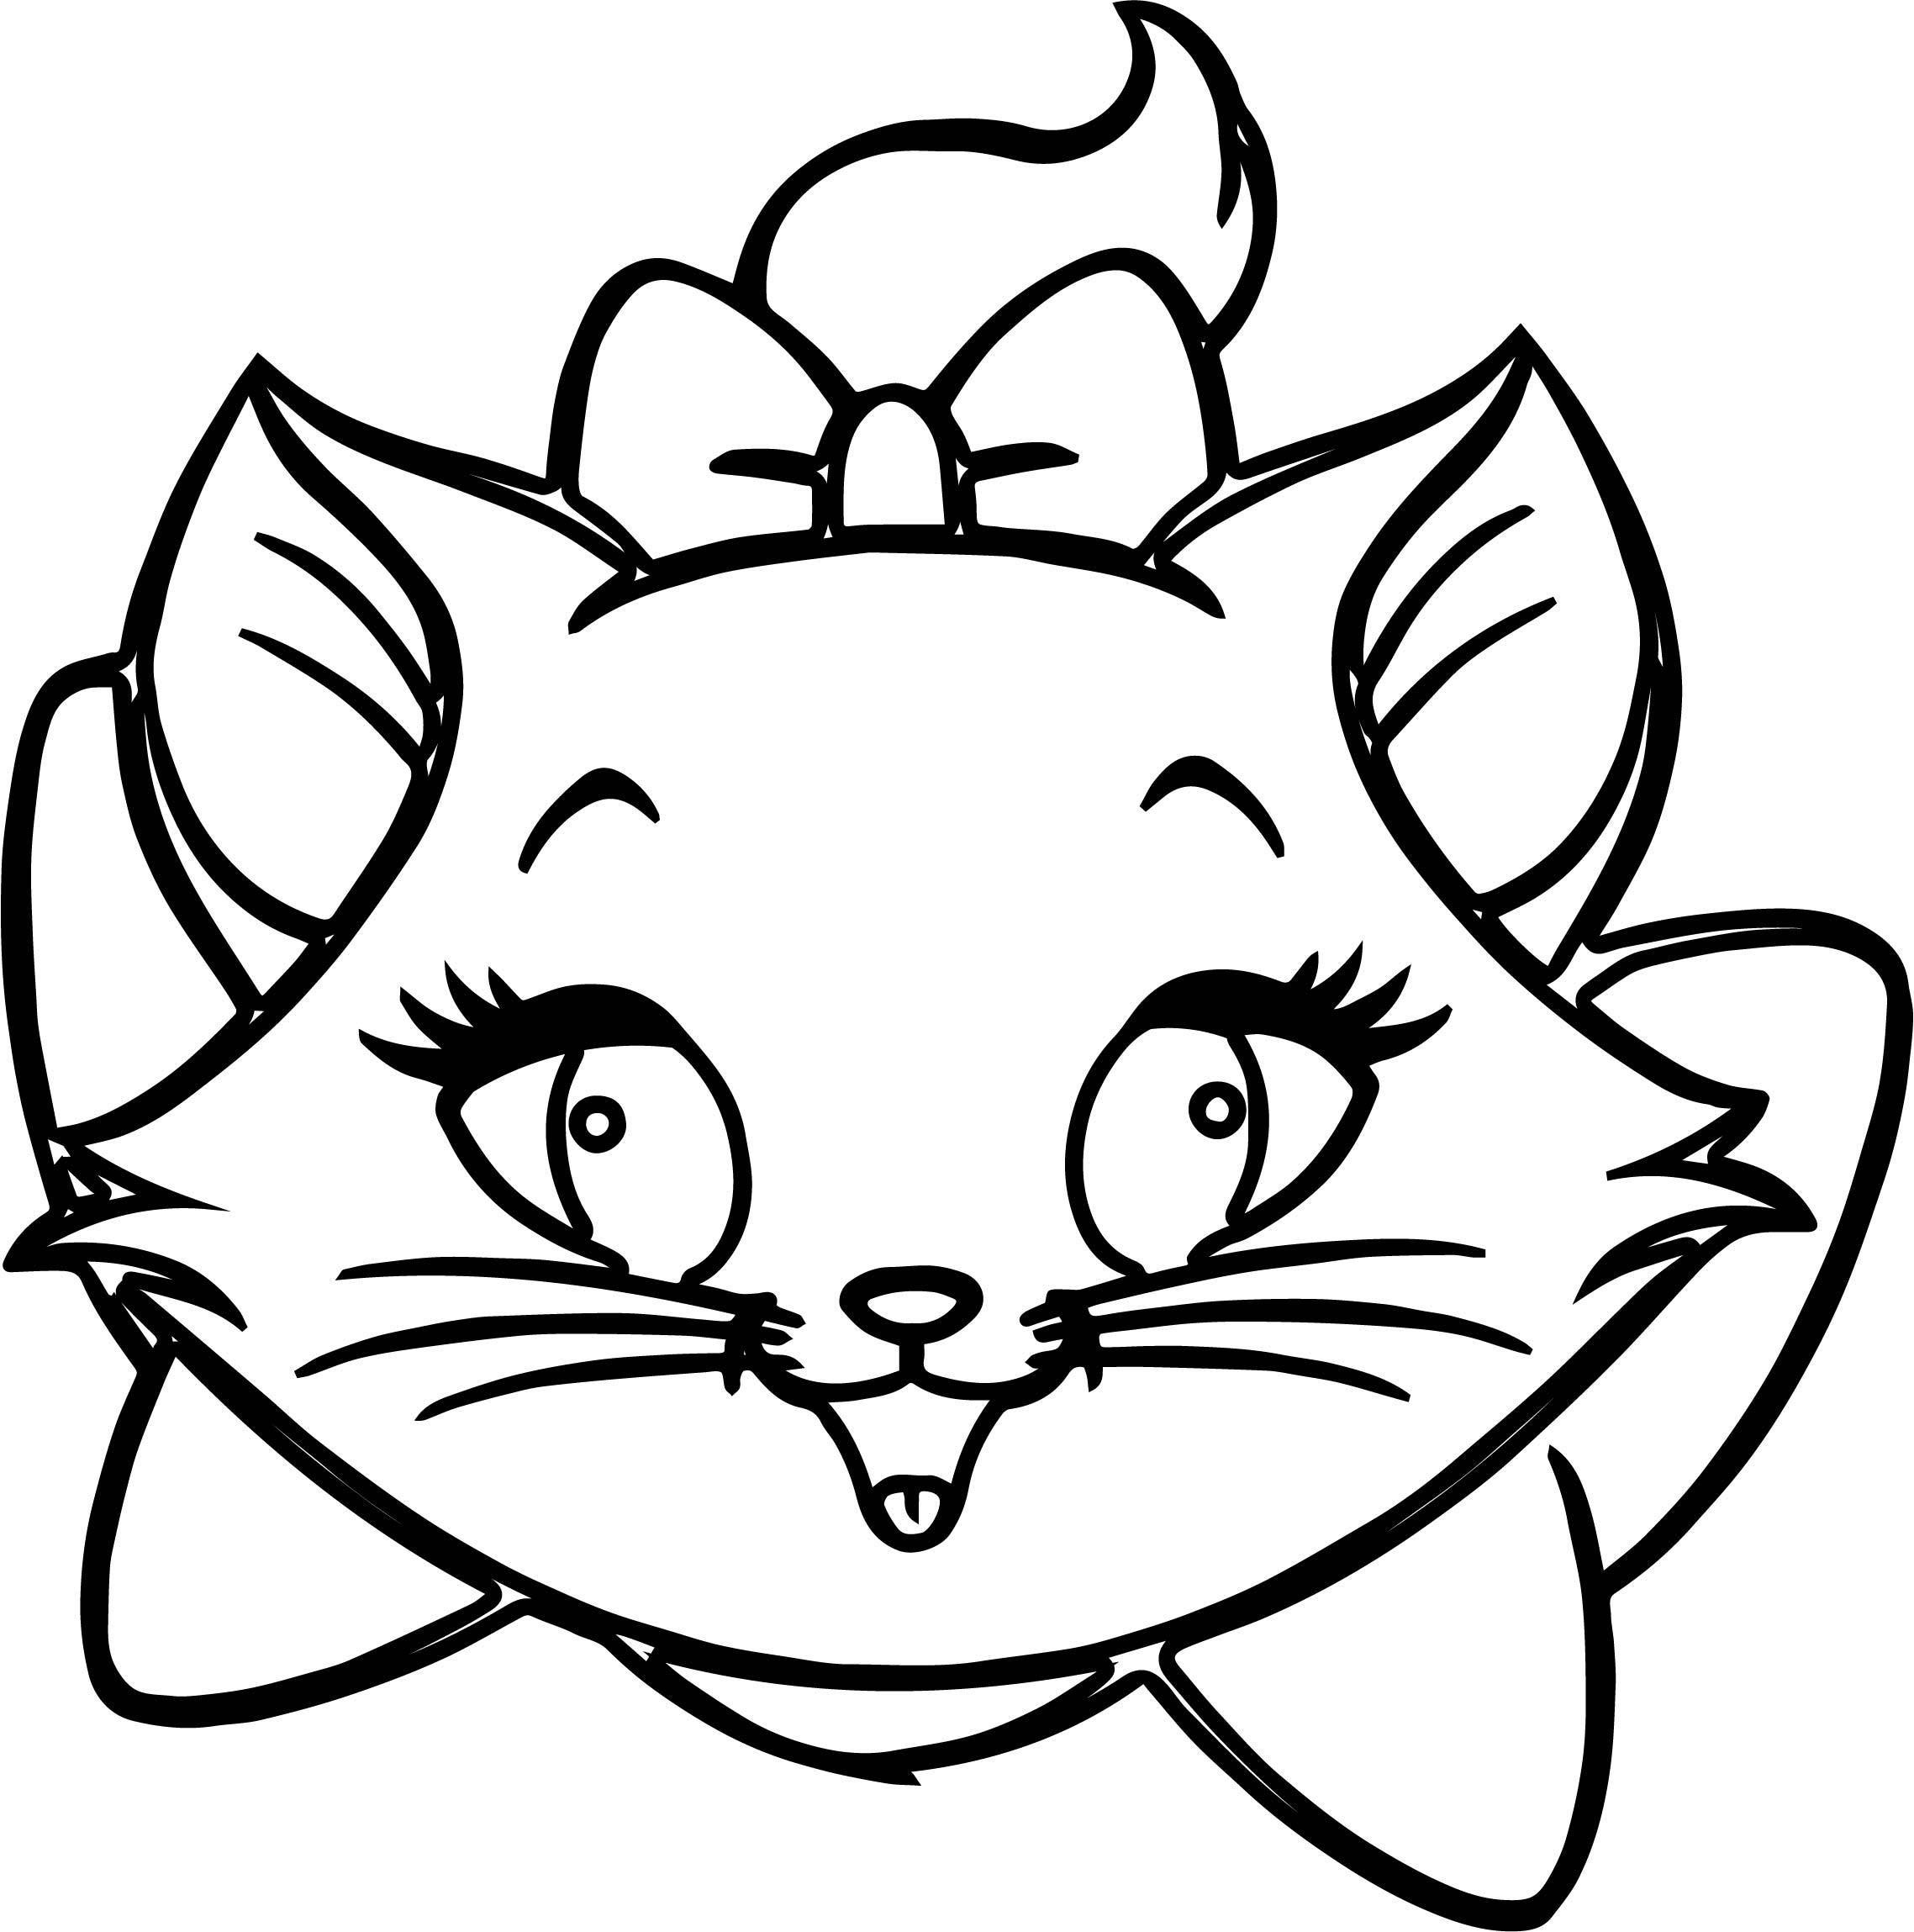 Cat Head Coloring Page at Free printable colorings